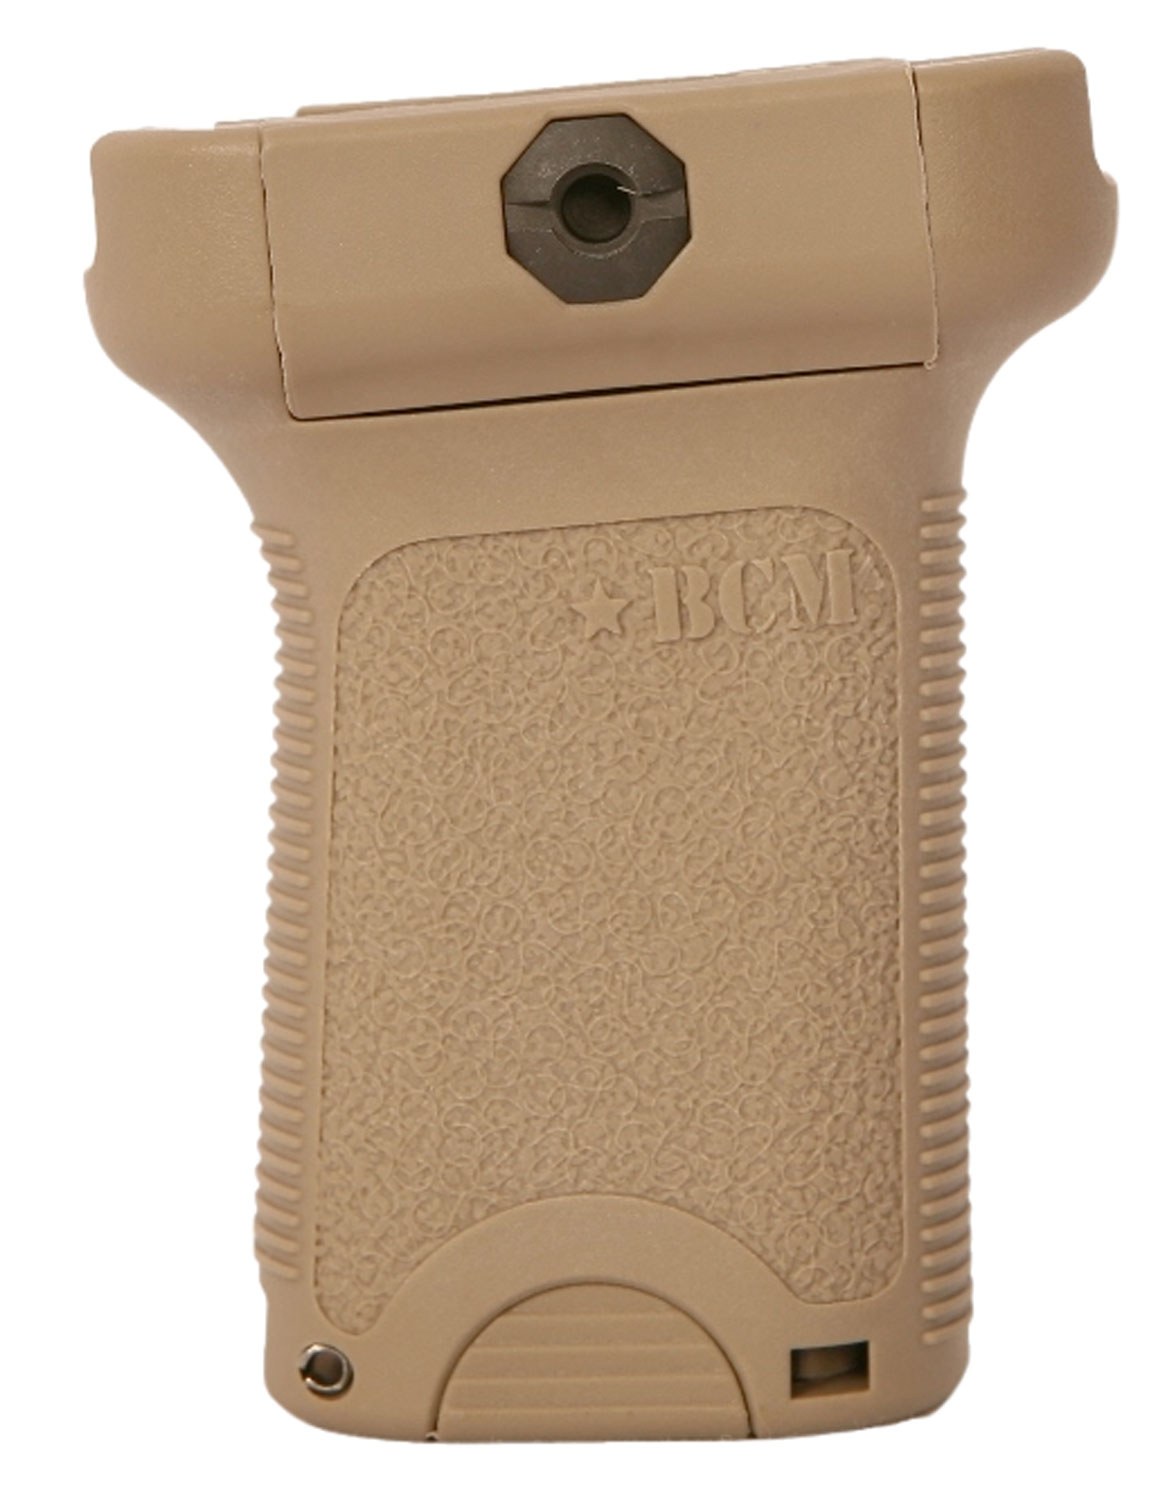 BCM VGSFDE BCMGunfighter Short Vertical Grip Made of Polymer With Flat Dark Earth Aggressive Textured Finish with Storage Compartment for Picatinny Rail